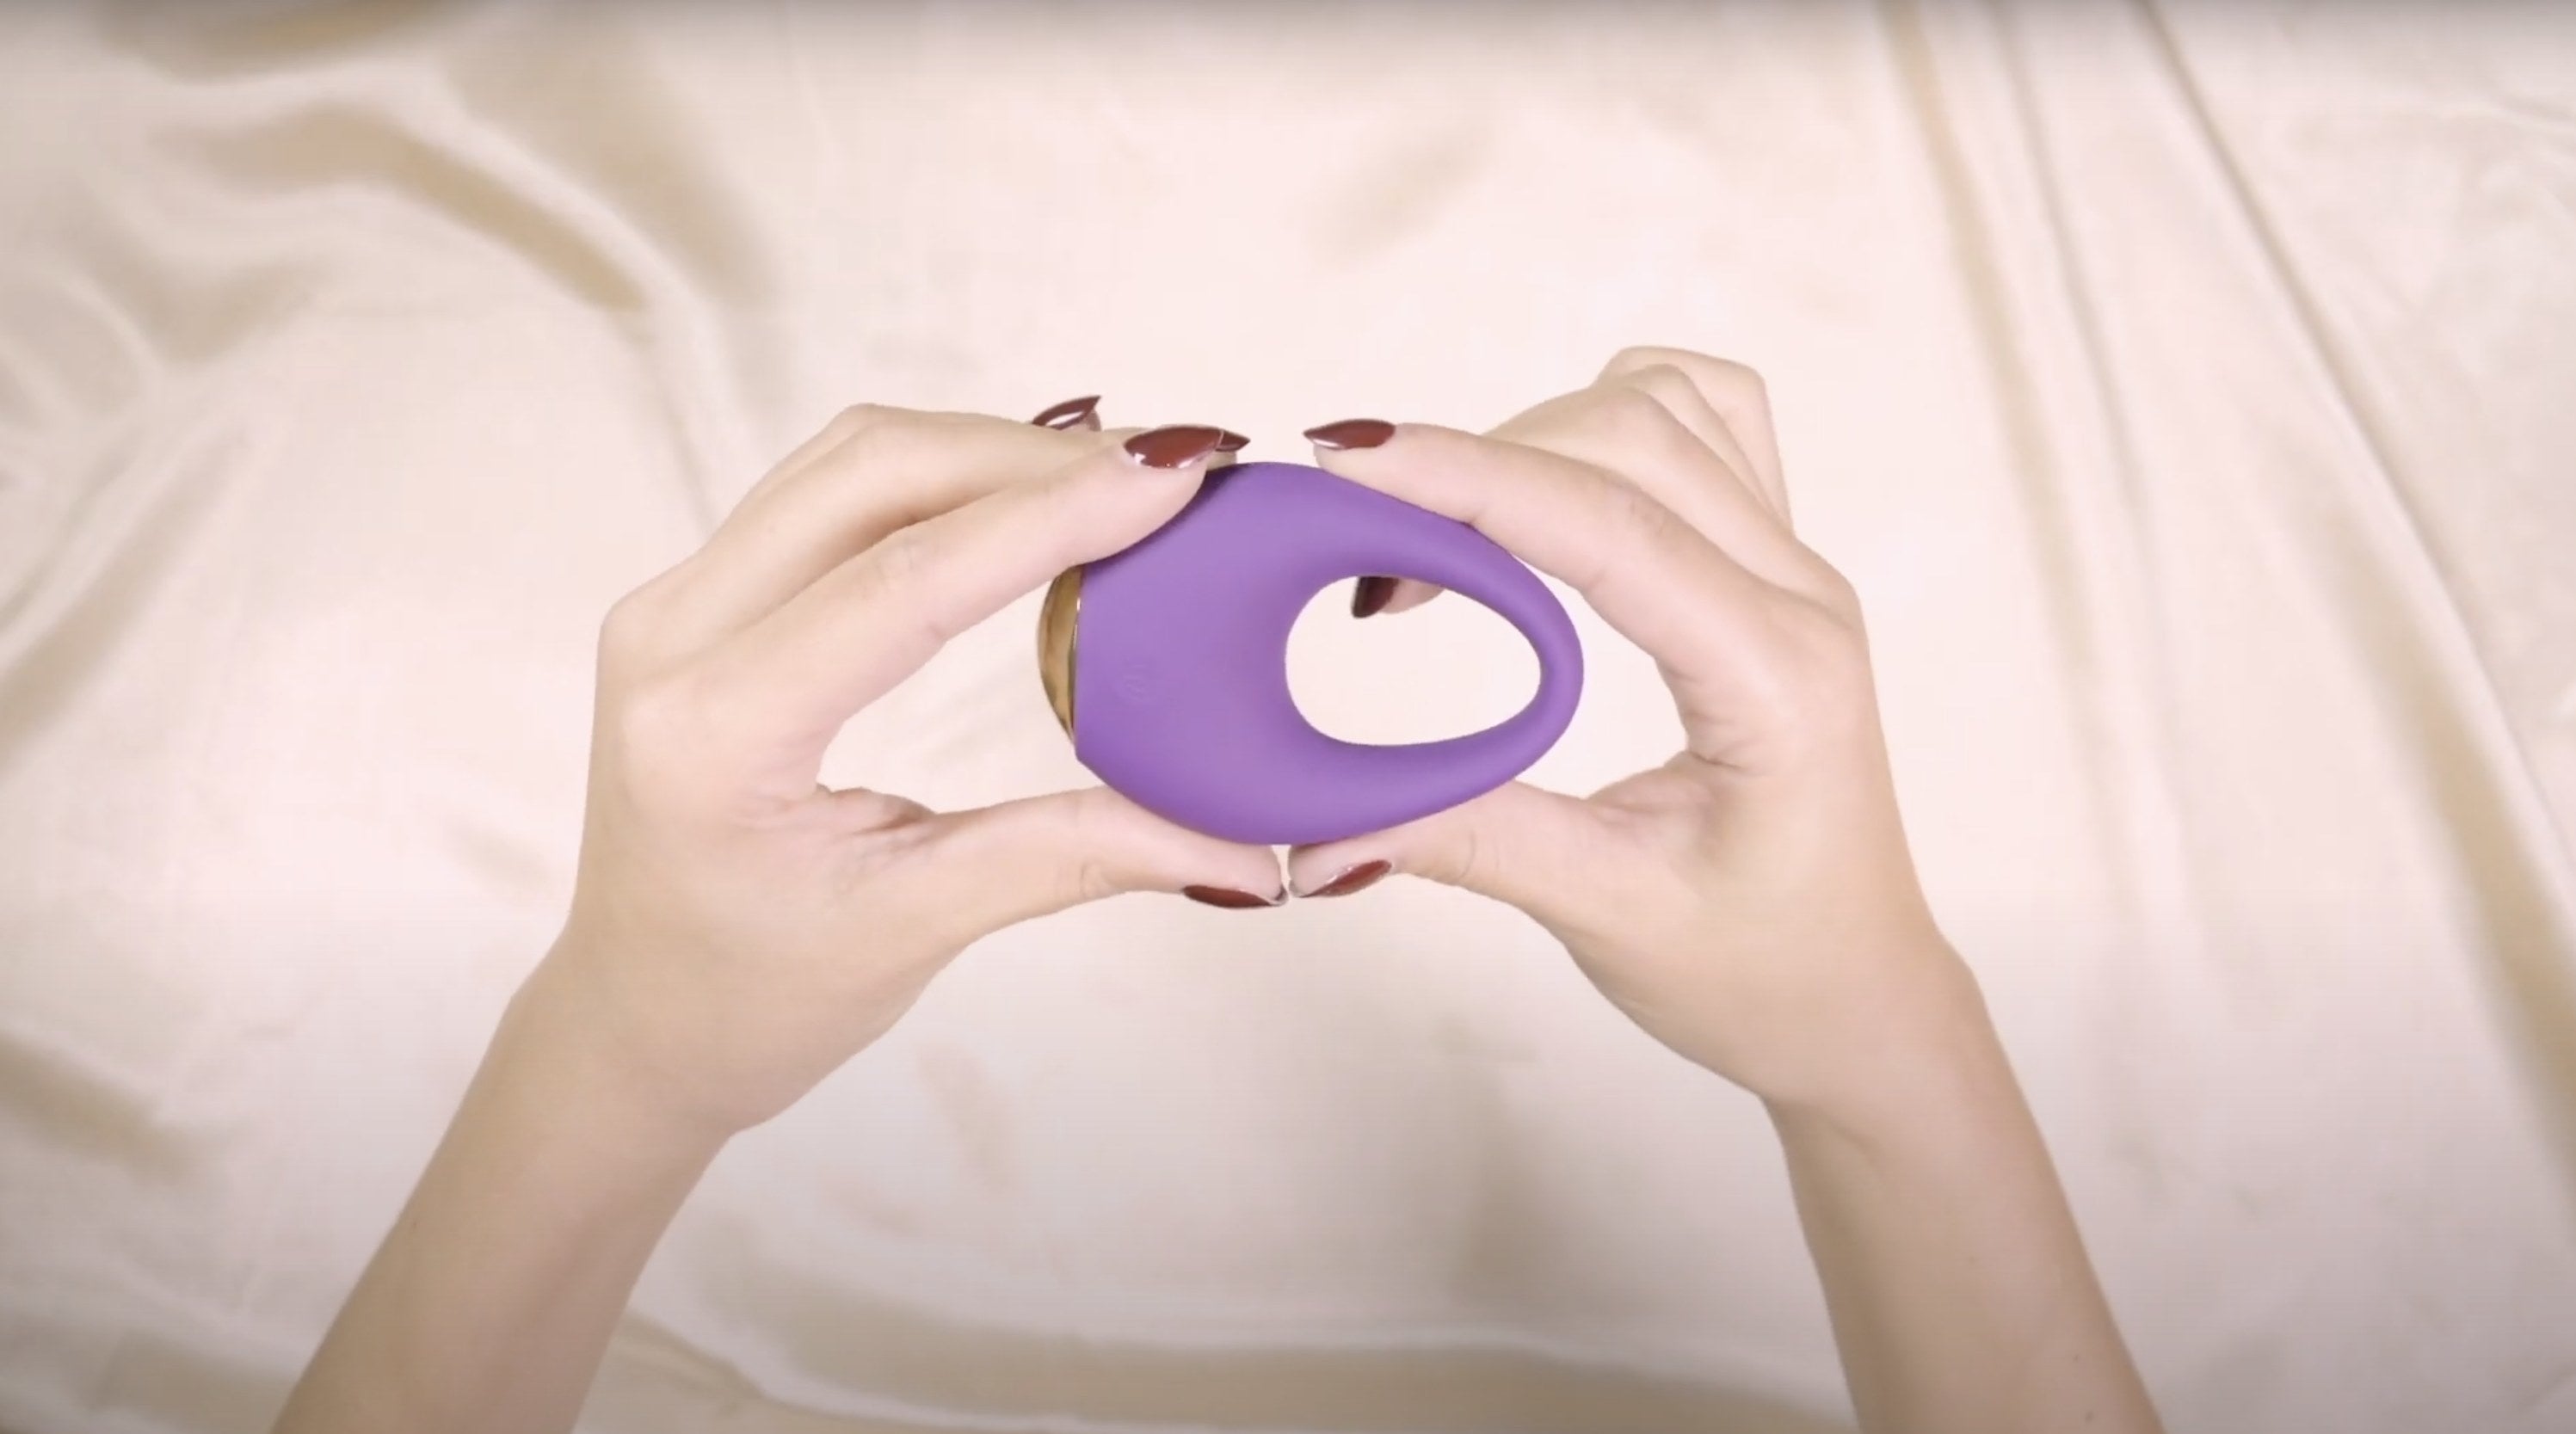 A model demonstrating how flexible the circular cock ring is